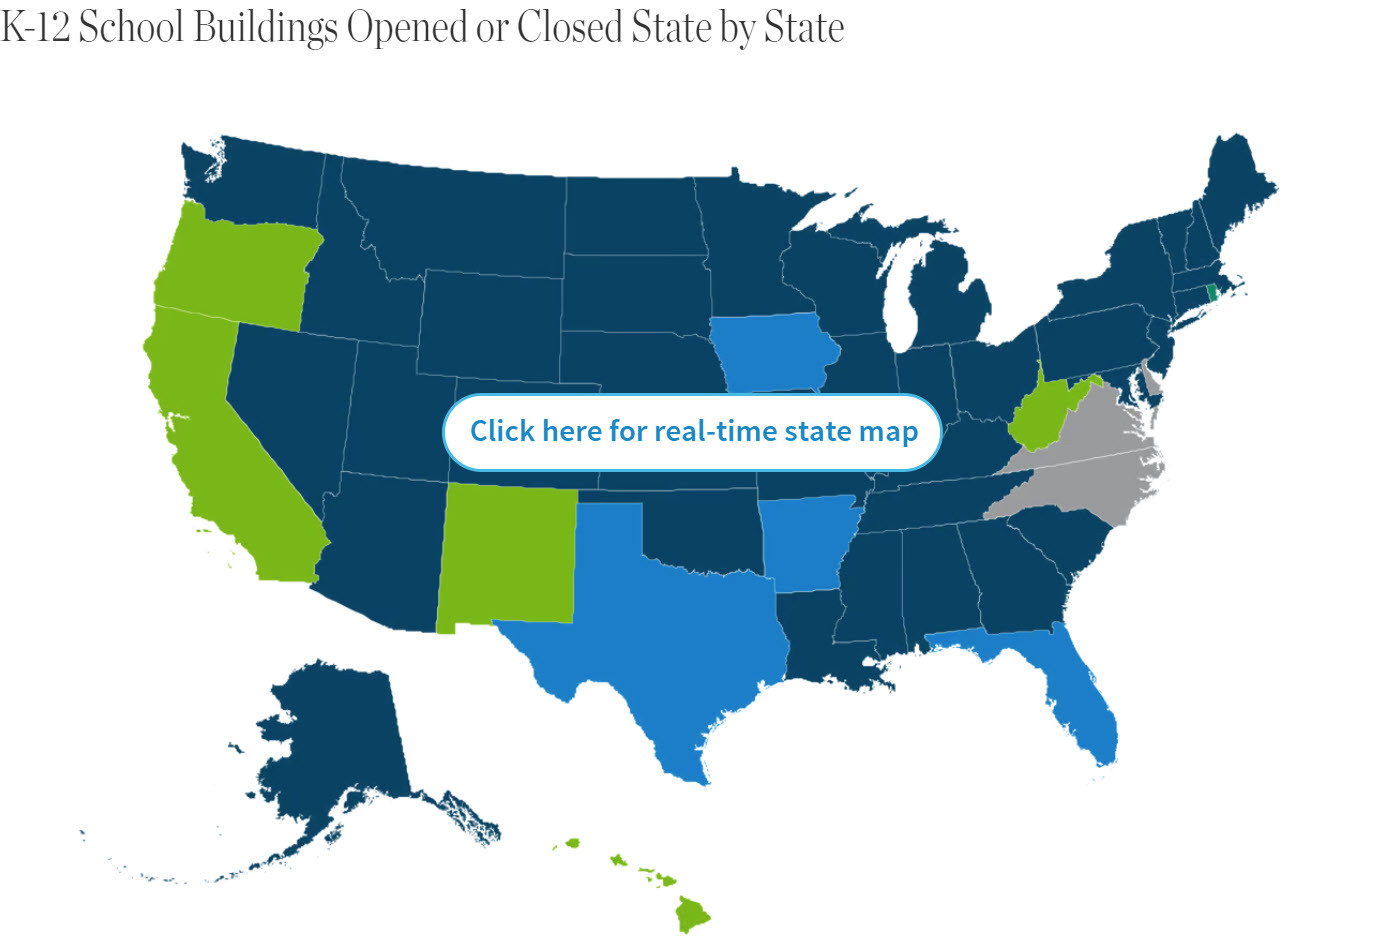 Map: K-12 School Buildings Opened or Closed State by State